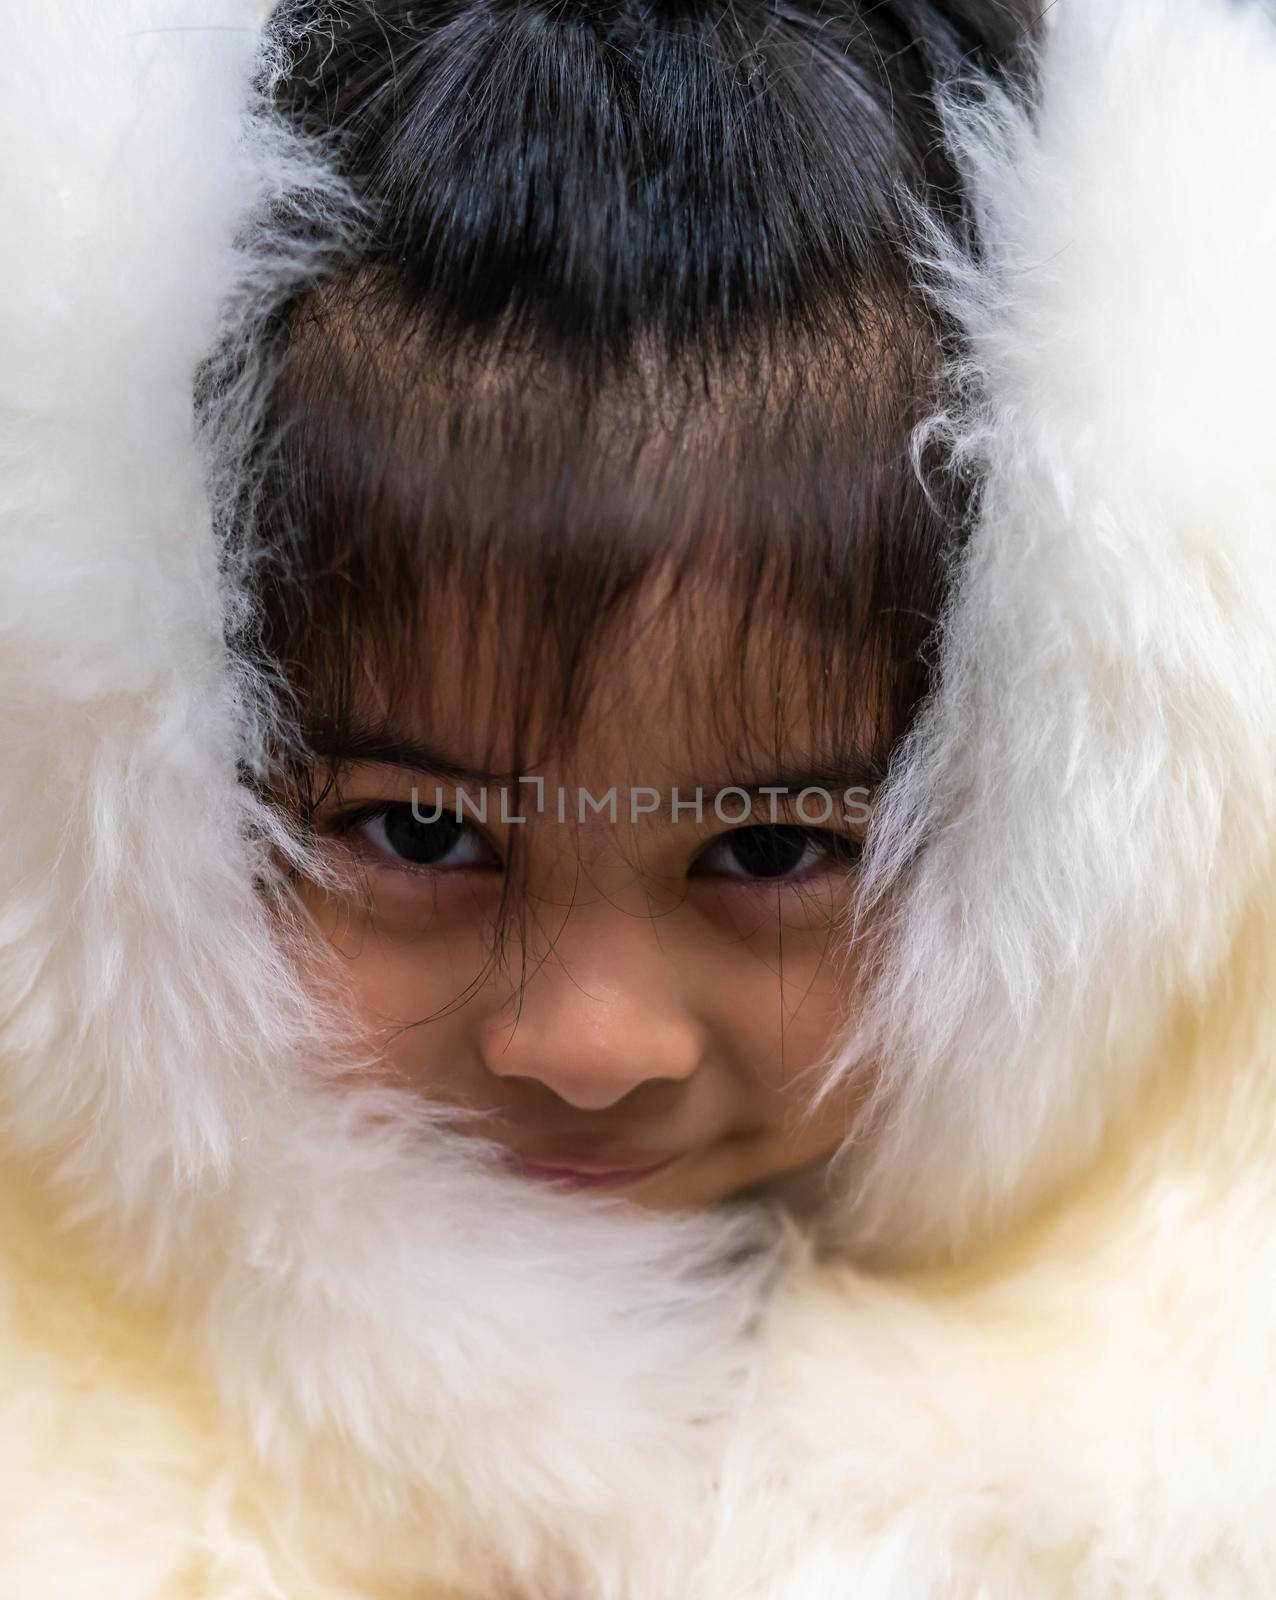 Pretty asian child wearing a white coat made of fur. Pretty asian model wearing white fur coat by billroque